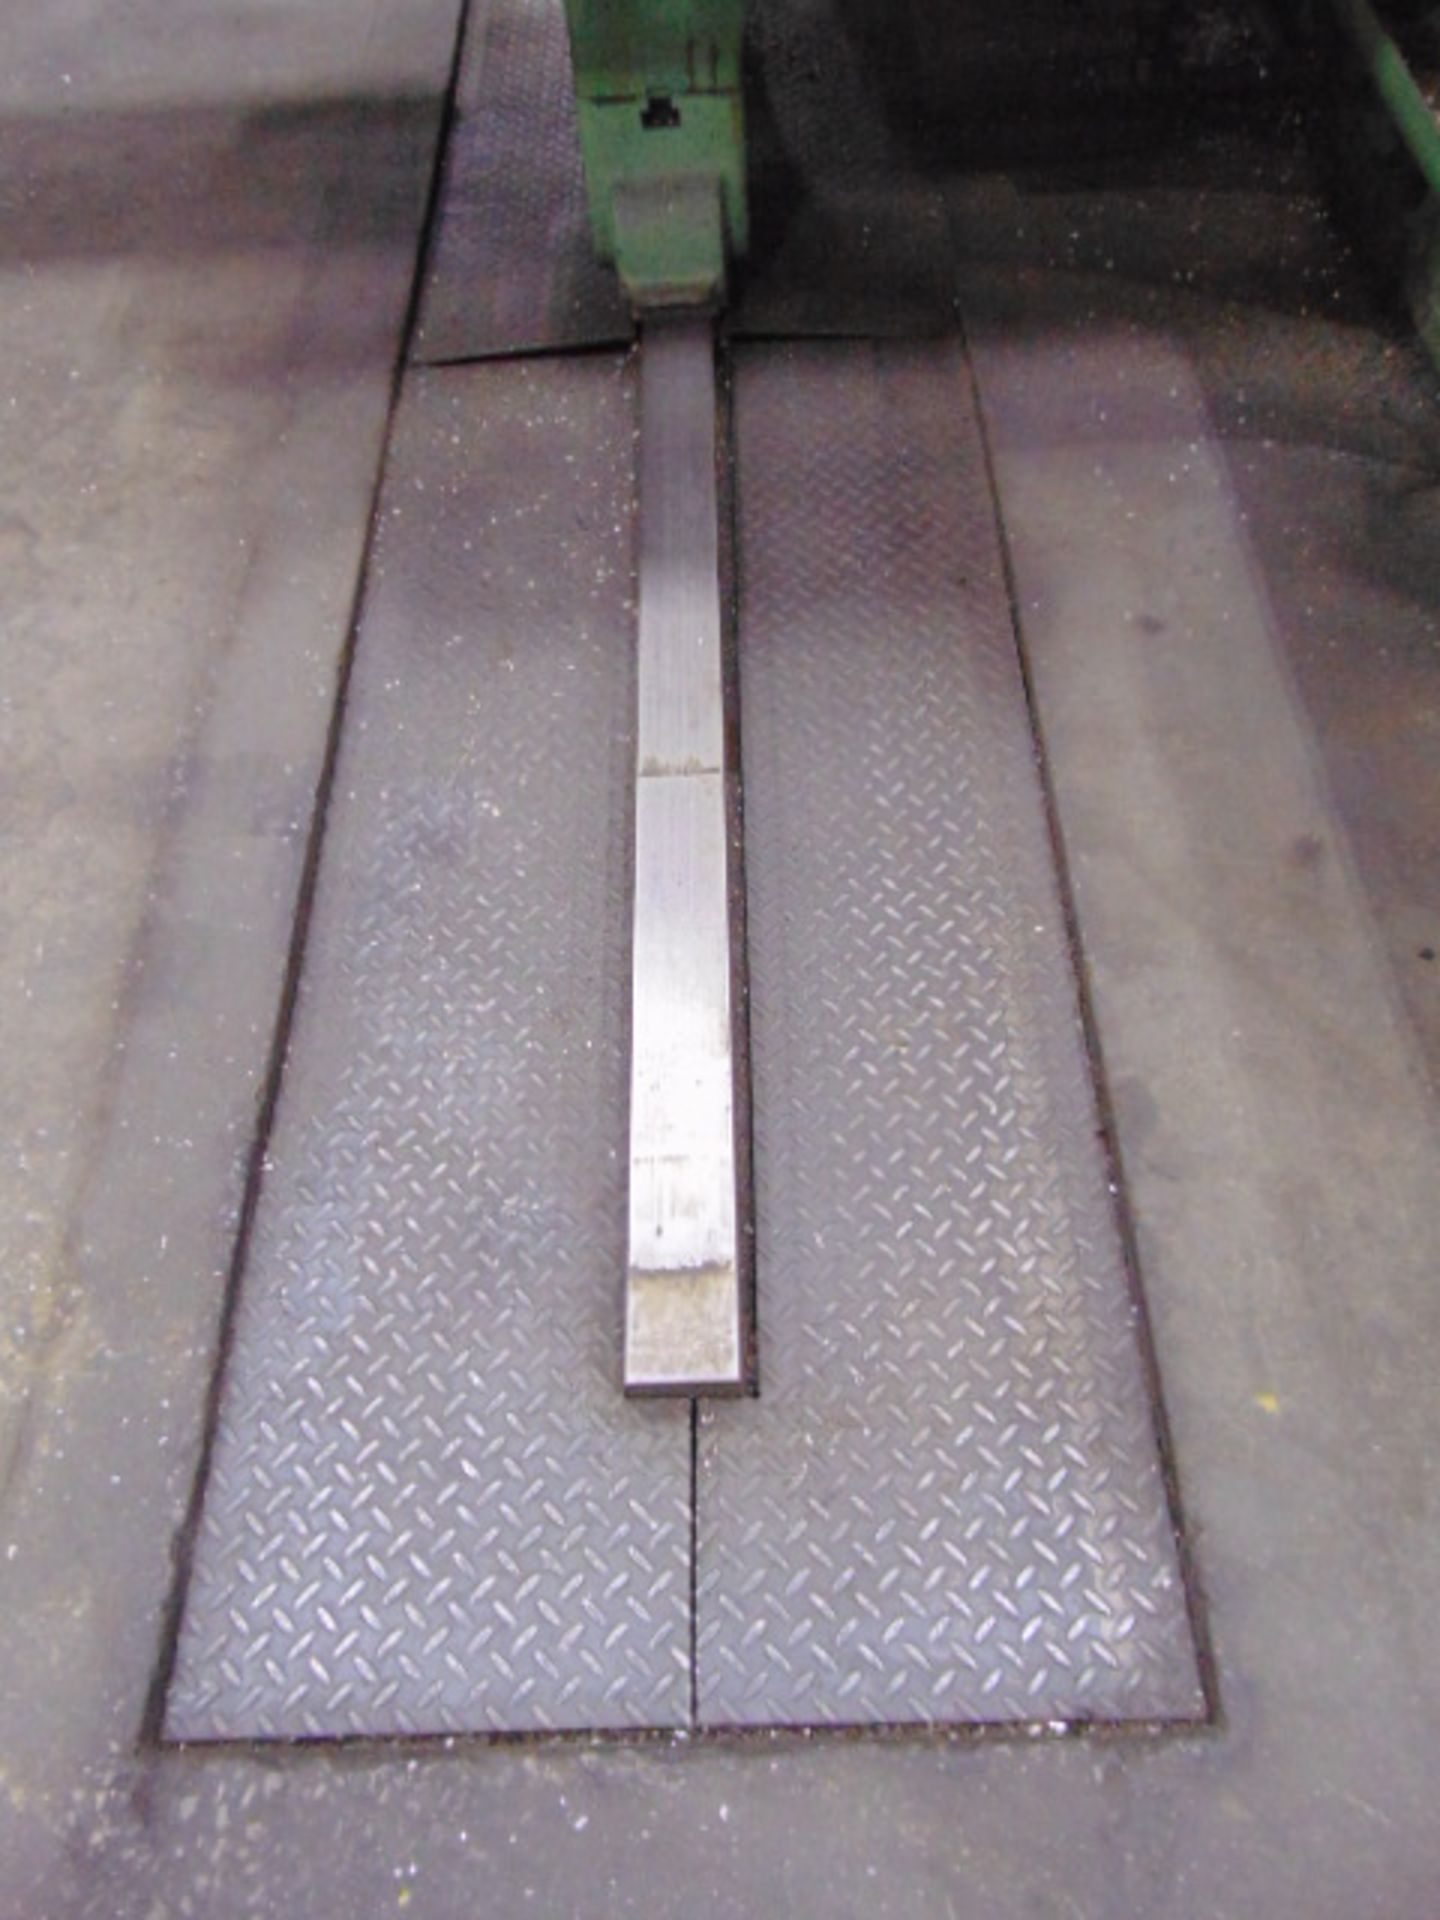 GIDDINGS & LEWIS FRASER CNC TABLE TYPE HORIZONTAL BORING MILL, 5", MDL. 70A-DP5-T, Fanuc OM CNC - Image 11 of 15